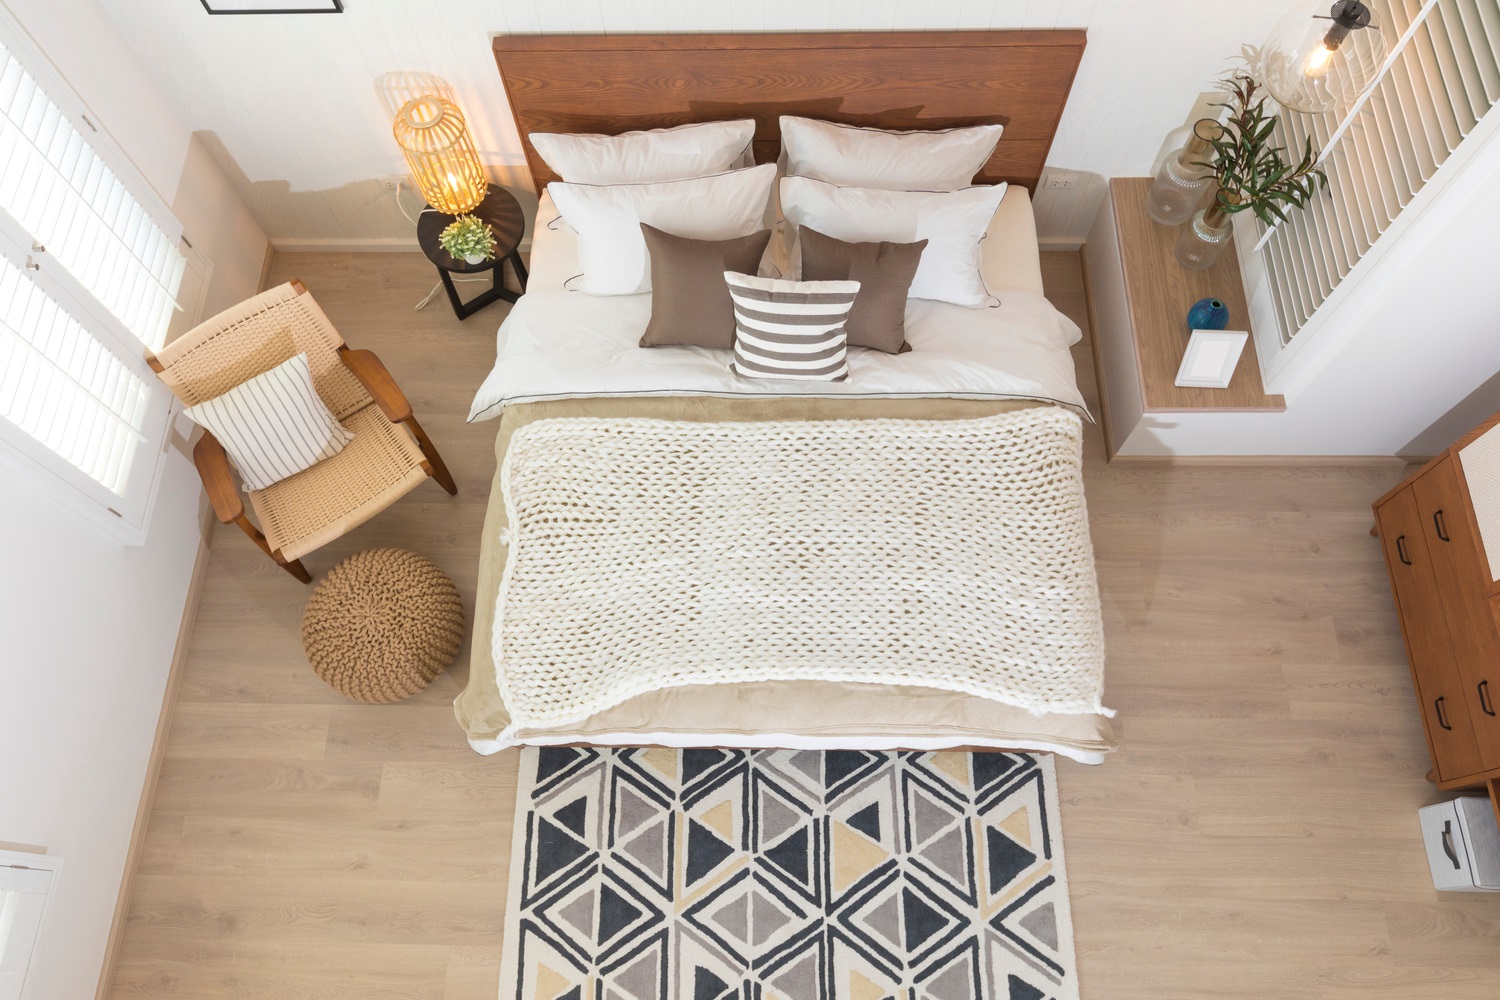 Area Rug Size for Small Room